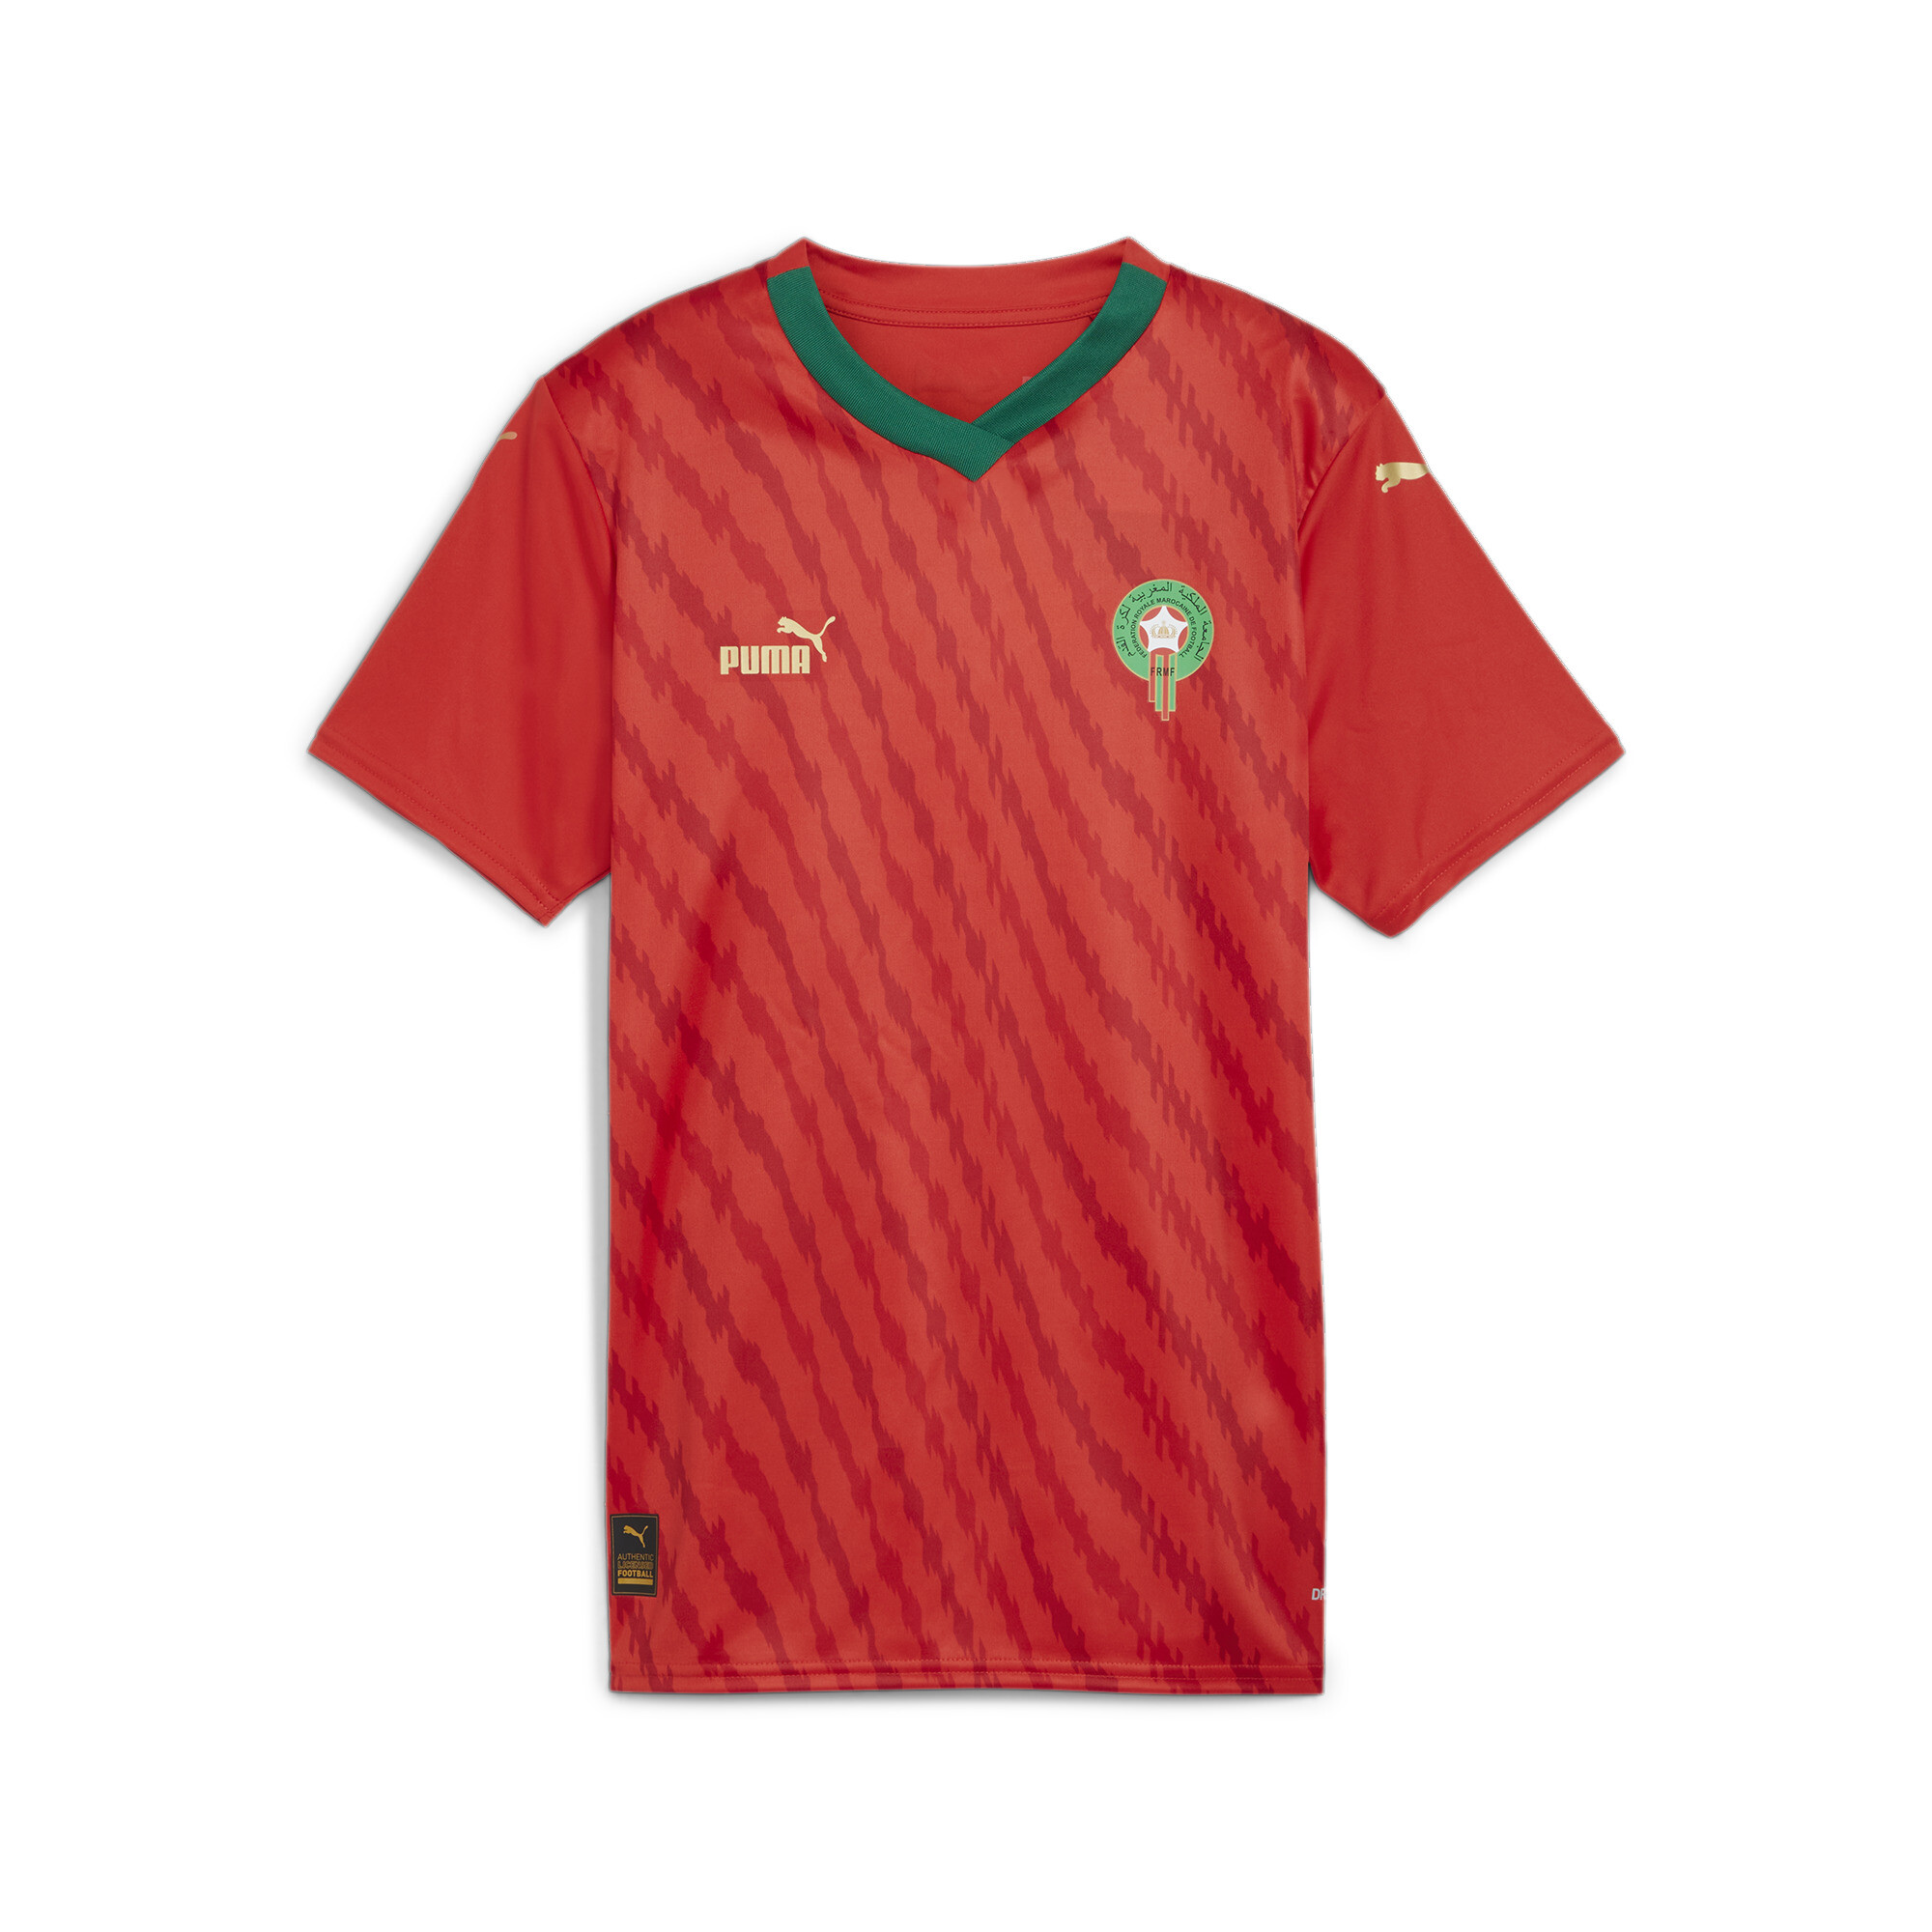 Women's PUMA Morocco 23/24 World Cup Home Jersey In Red, Size XS